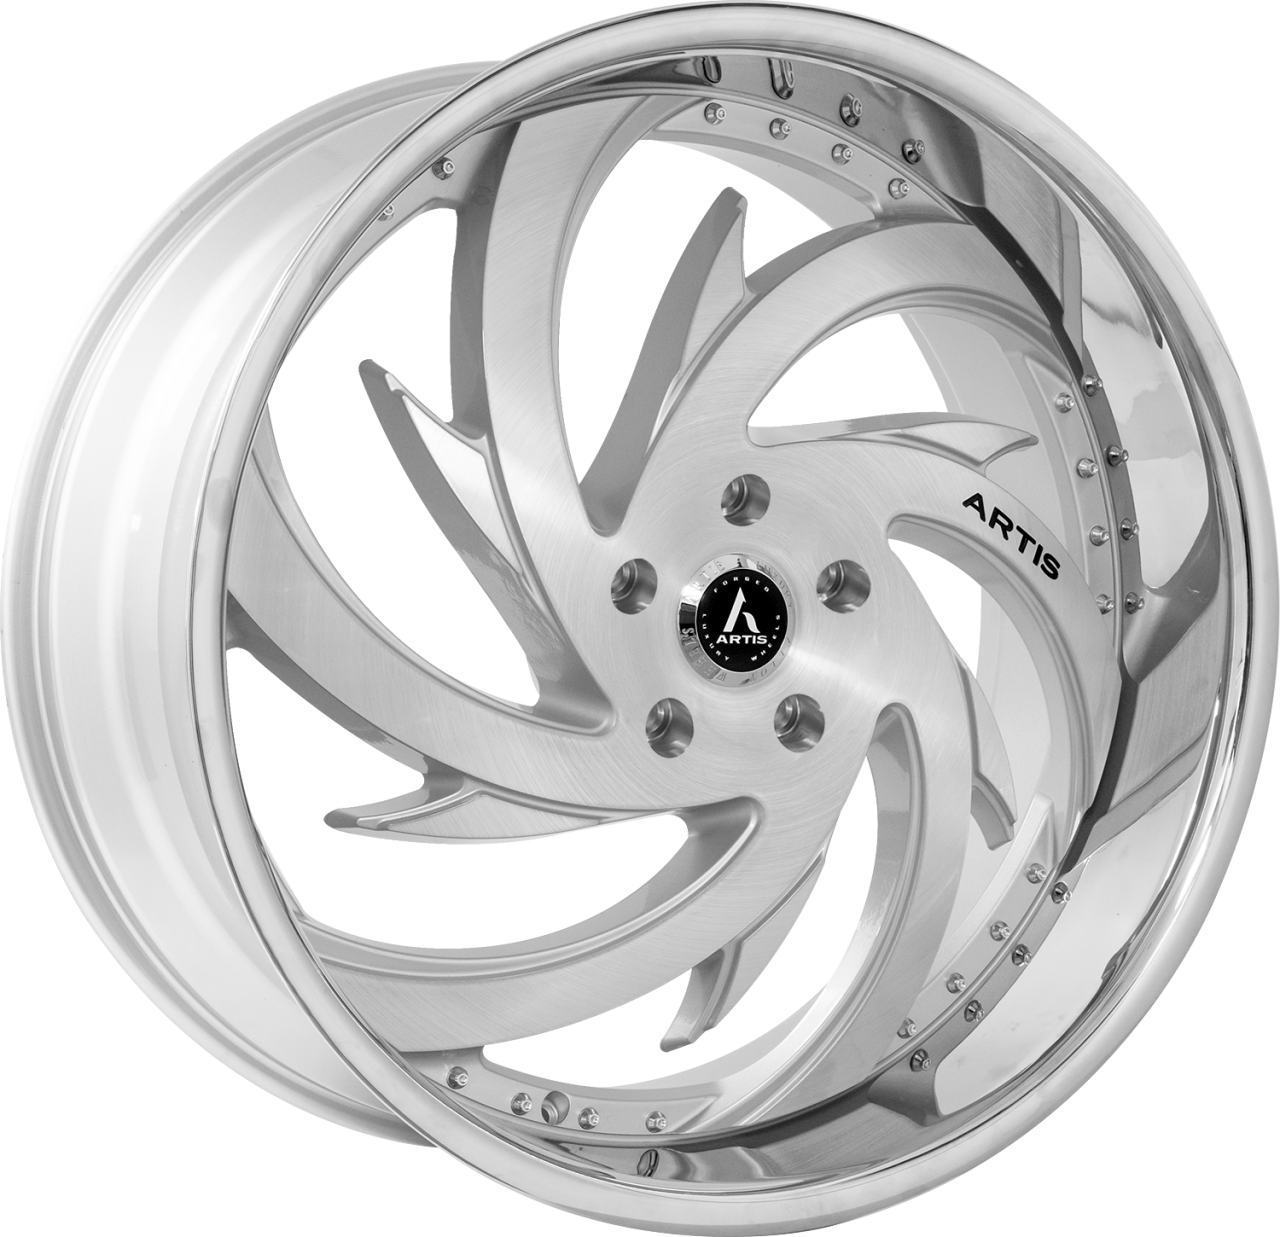 Artis Forged Spada wheel with Silver Finish finish